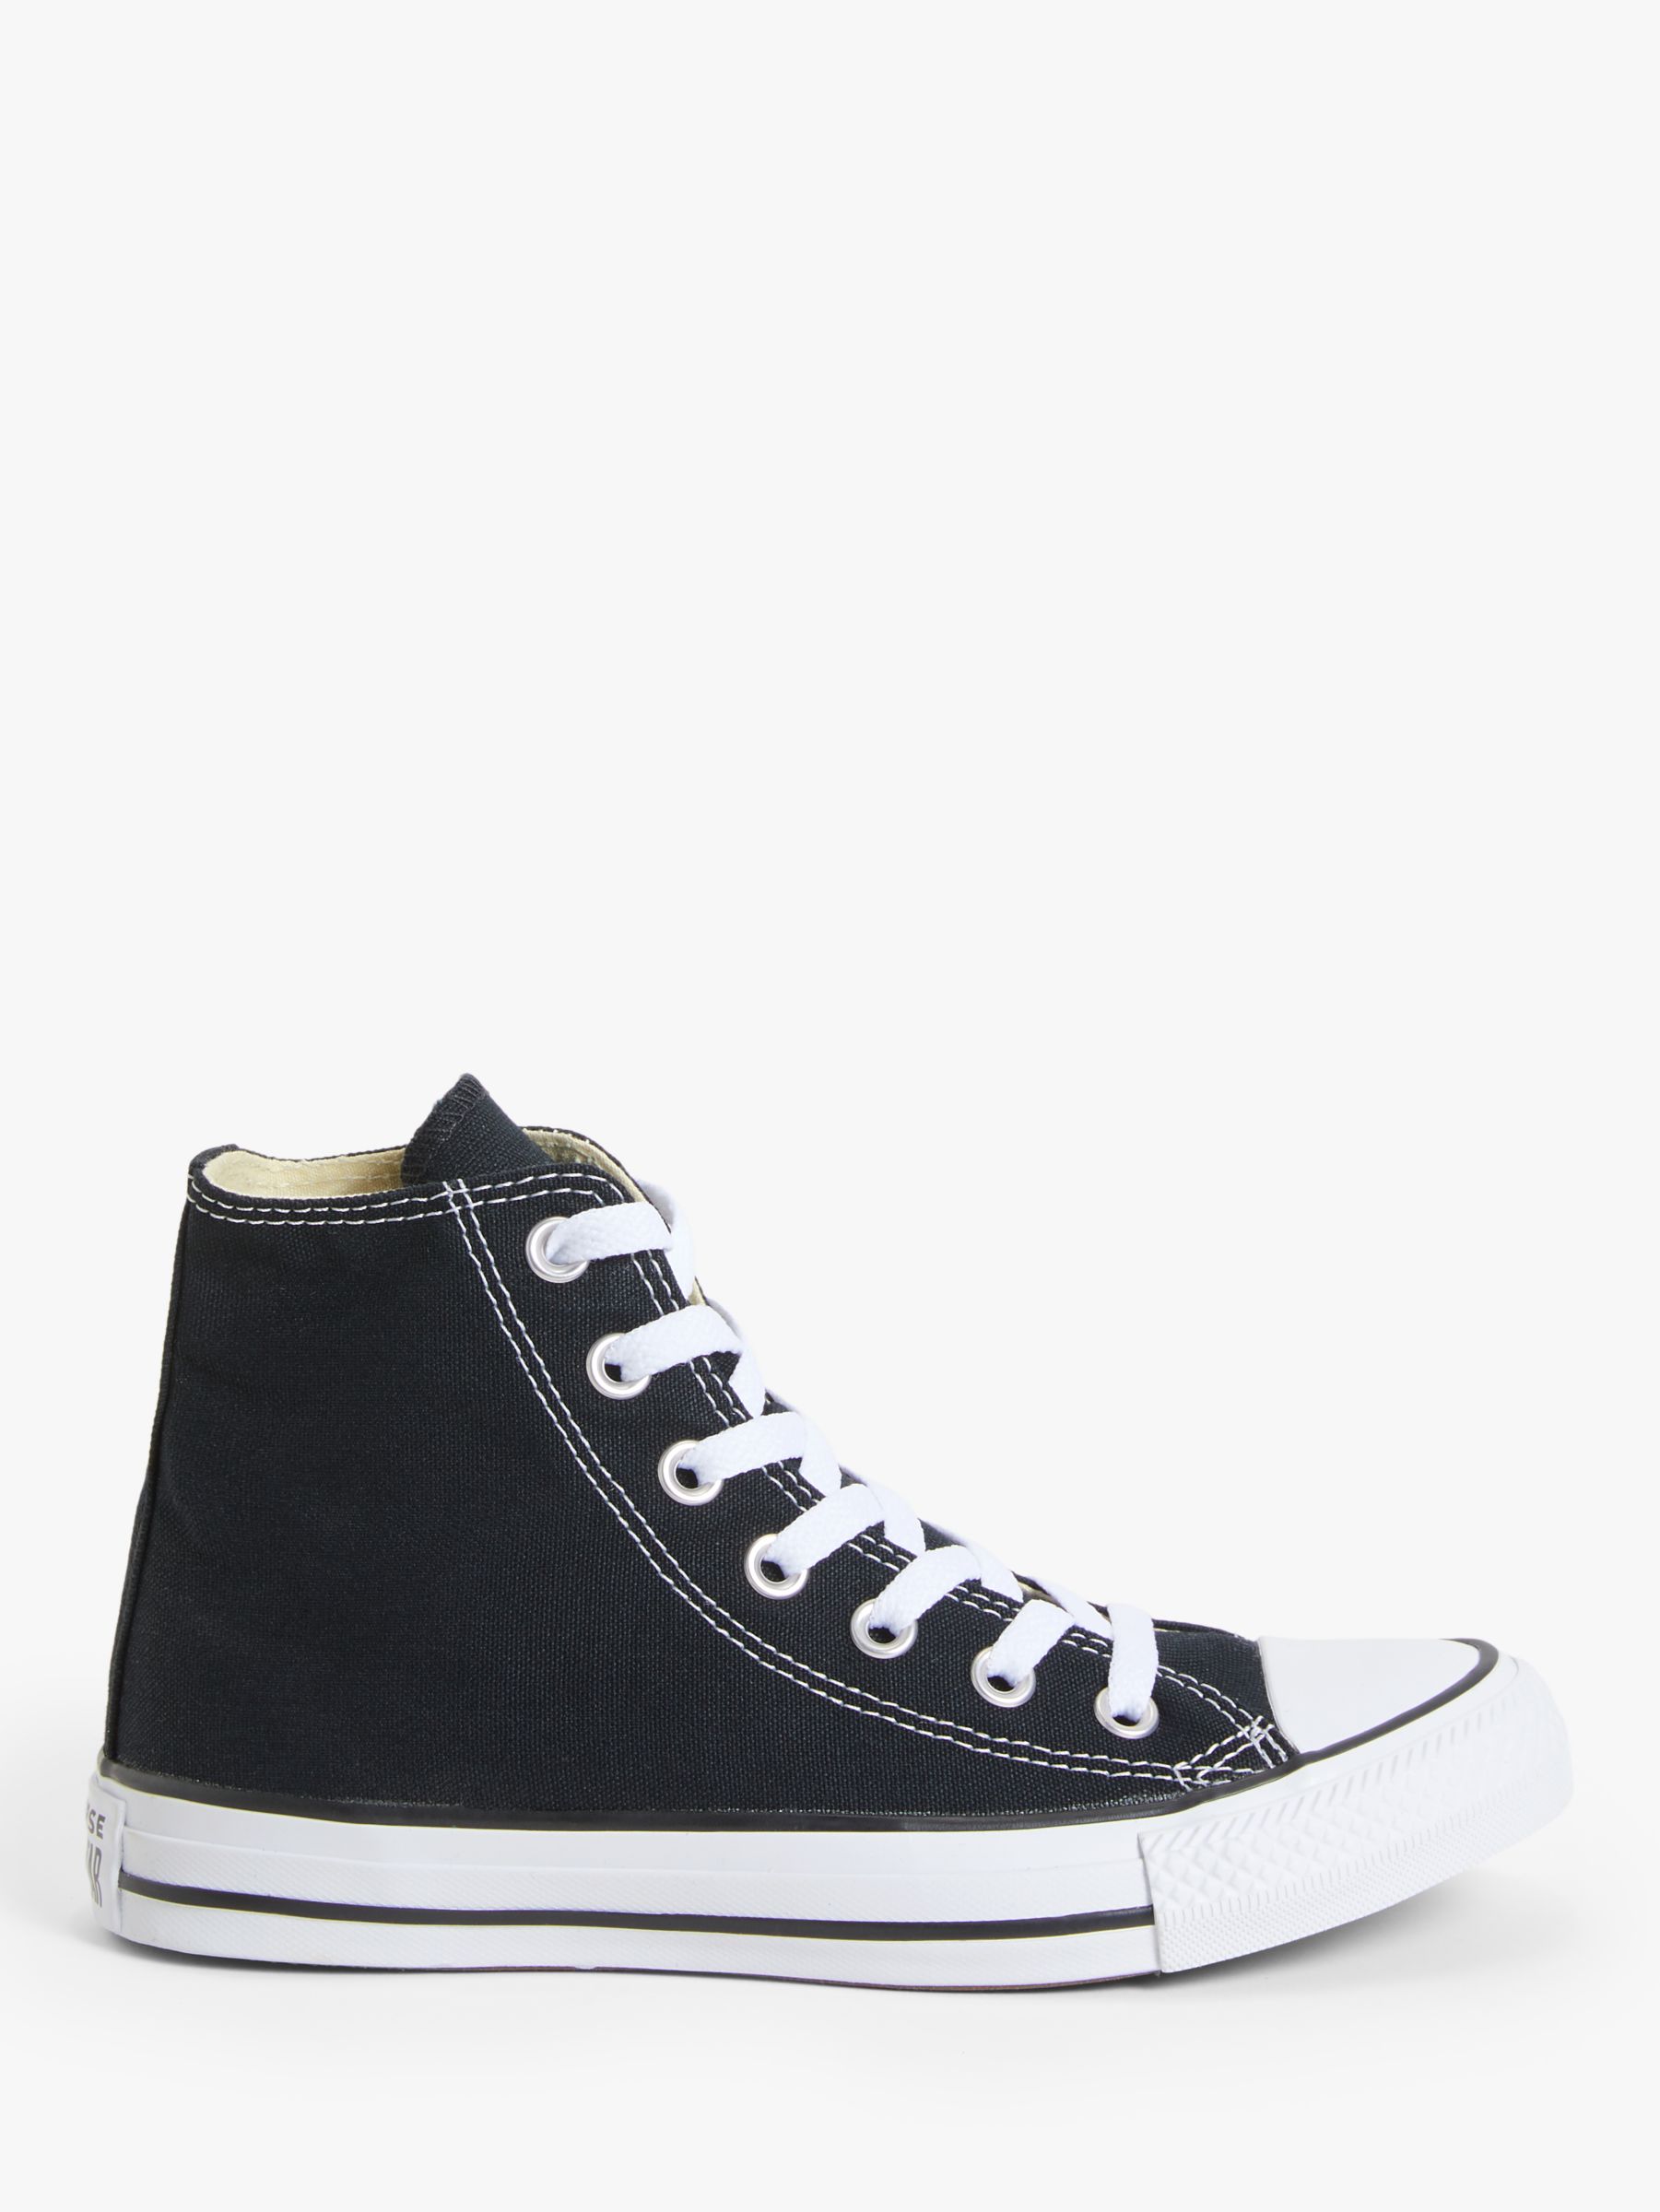 converse unisex chuck taylor all star canvas hi top trainers